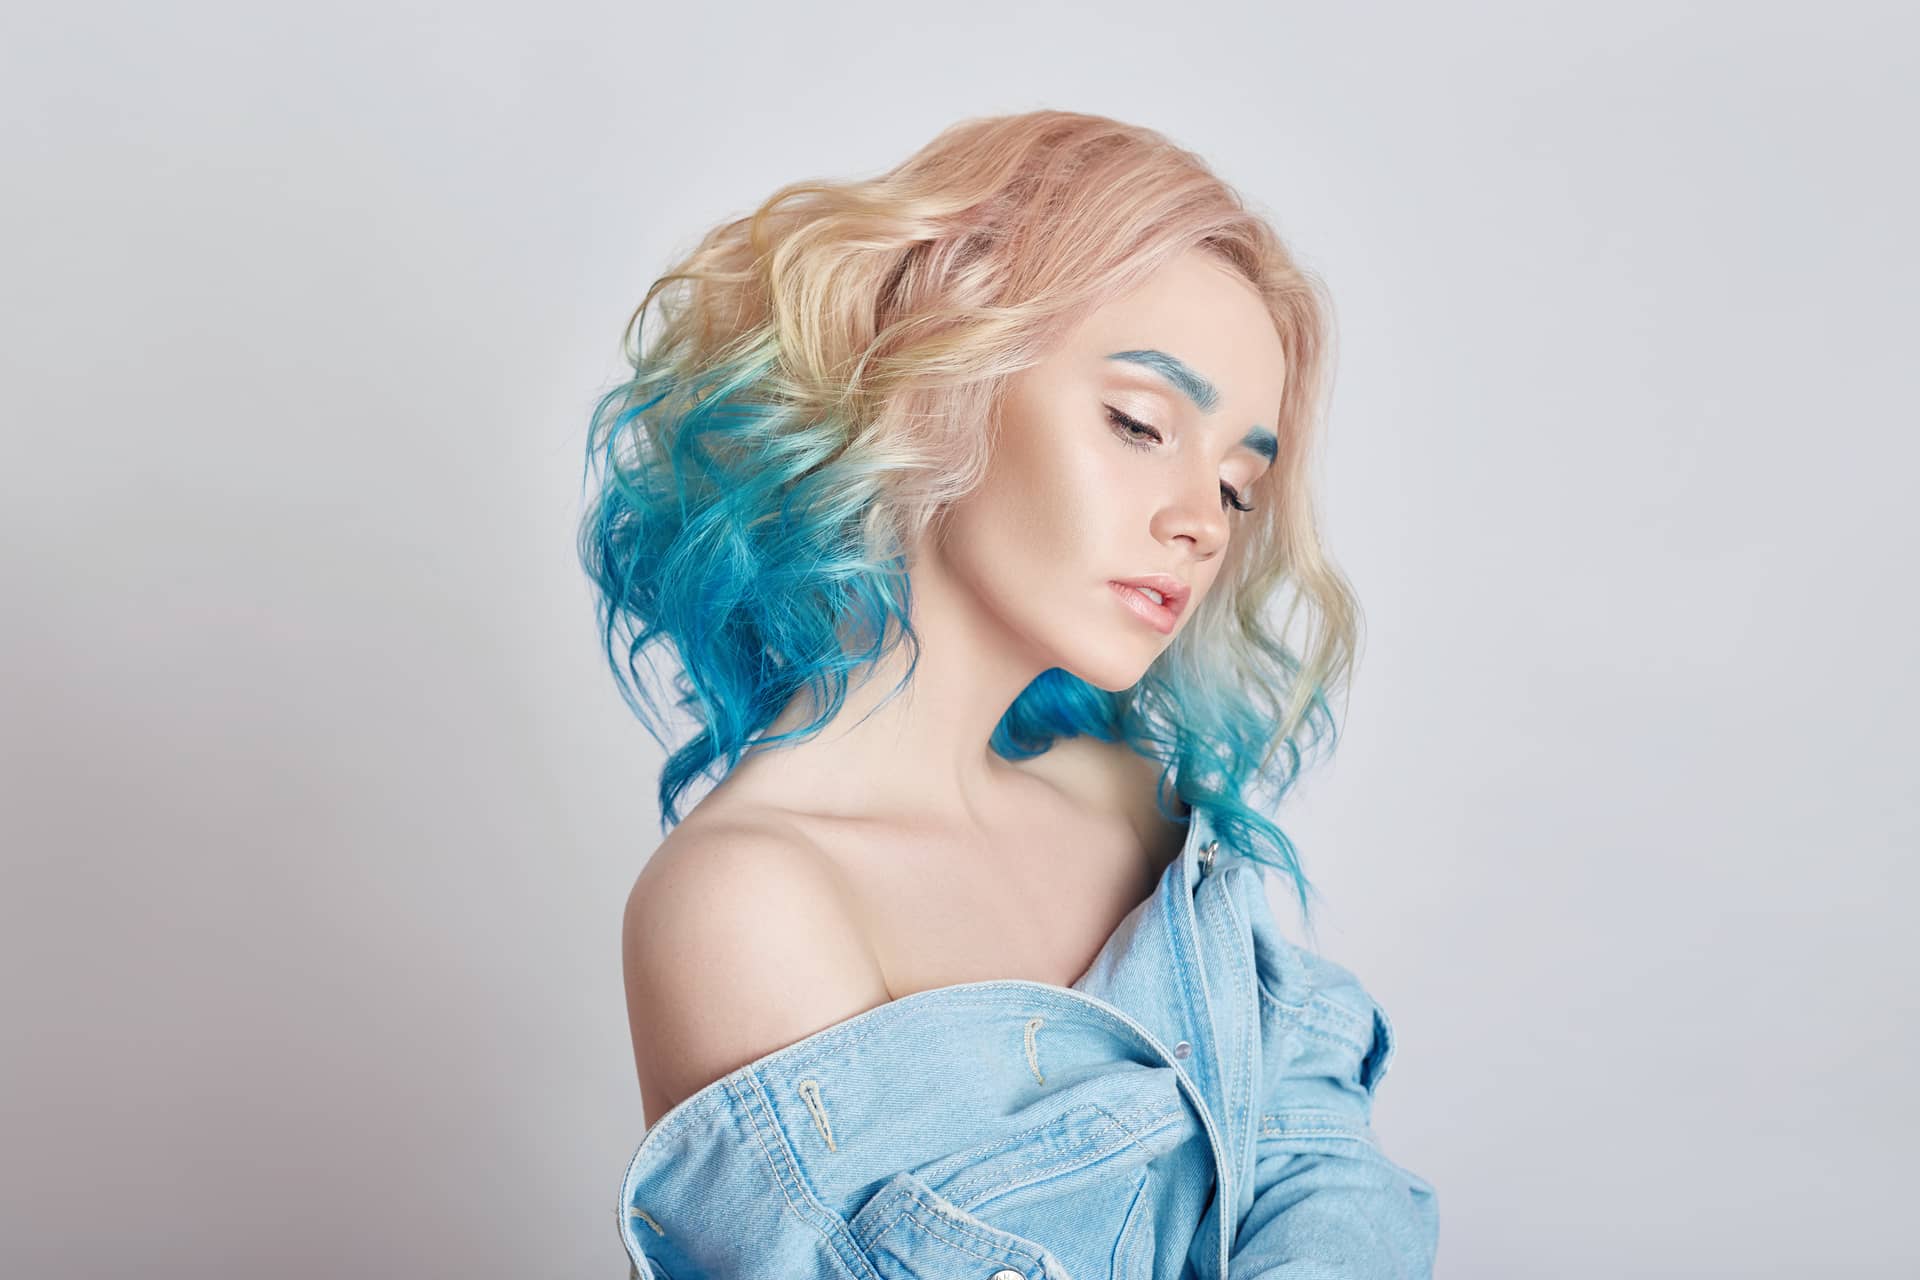 Portrait woman with bright colored flying hair profile photo